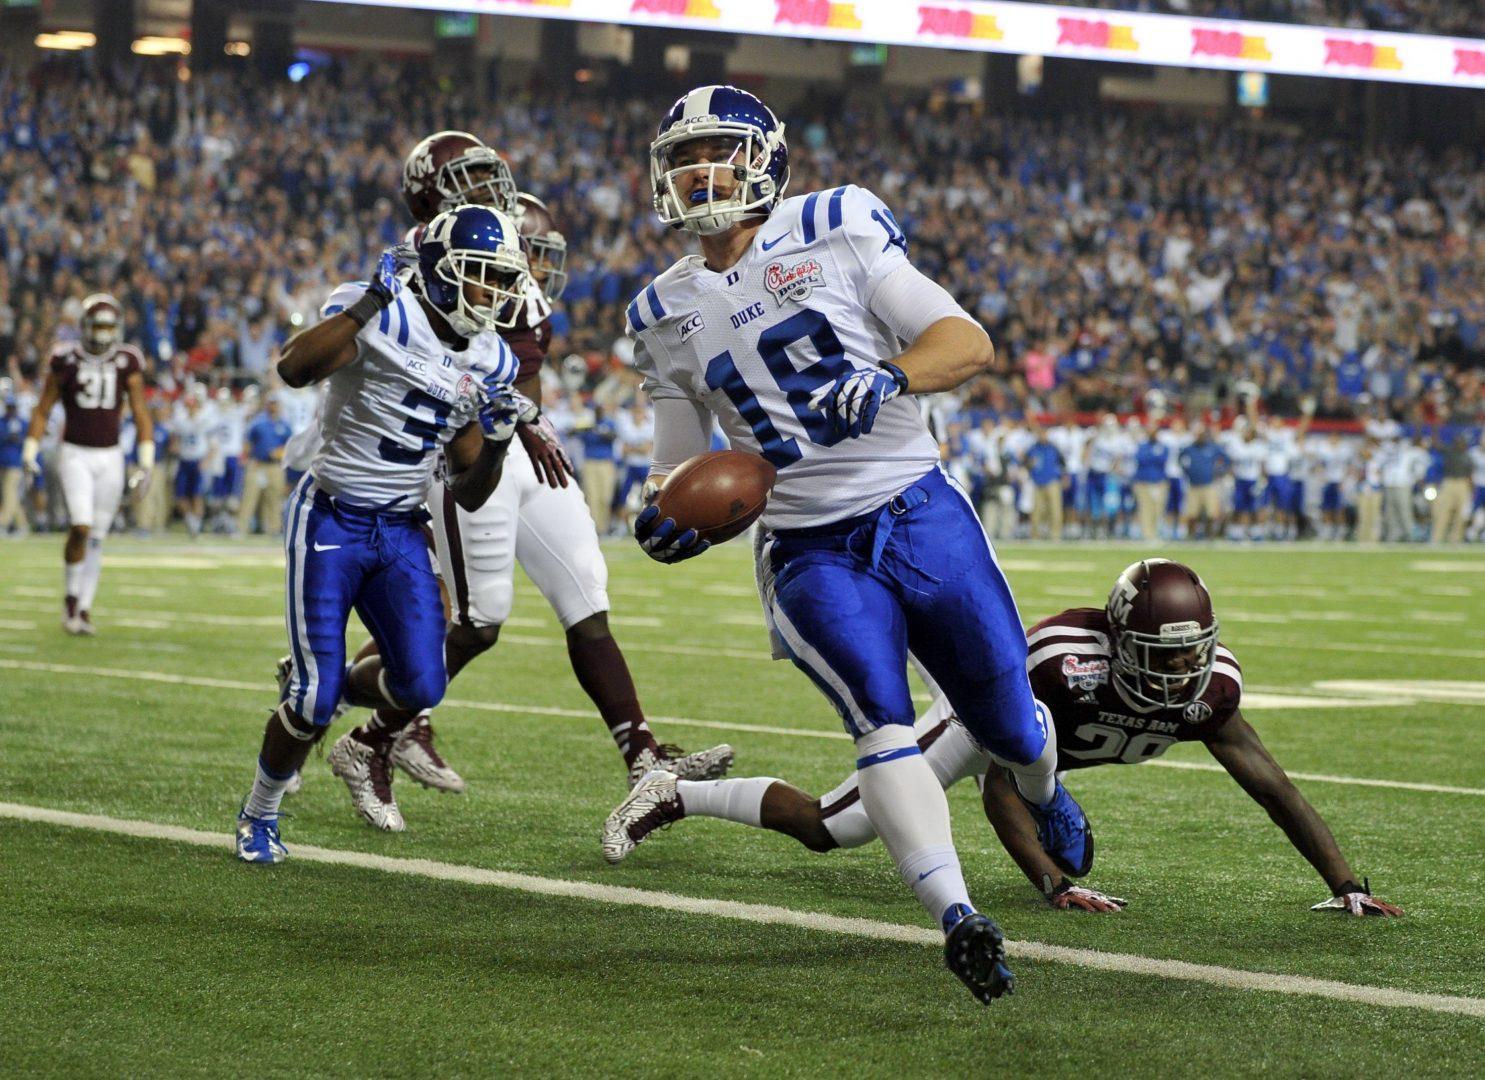 Quarterback Brandon Connette, shown here as a Duke Blue Devil, scores against the Texas A&M Aggies during the first quarter of the Chick-fil-A Bowl at the Georgia Dome in Atlanta on Tuesday, Dec. 31, 2013. Fresno State signed Connette last Friday. Photo by Brant Sanderlin/McClatchy-Tribune